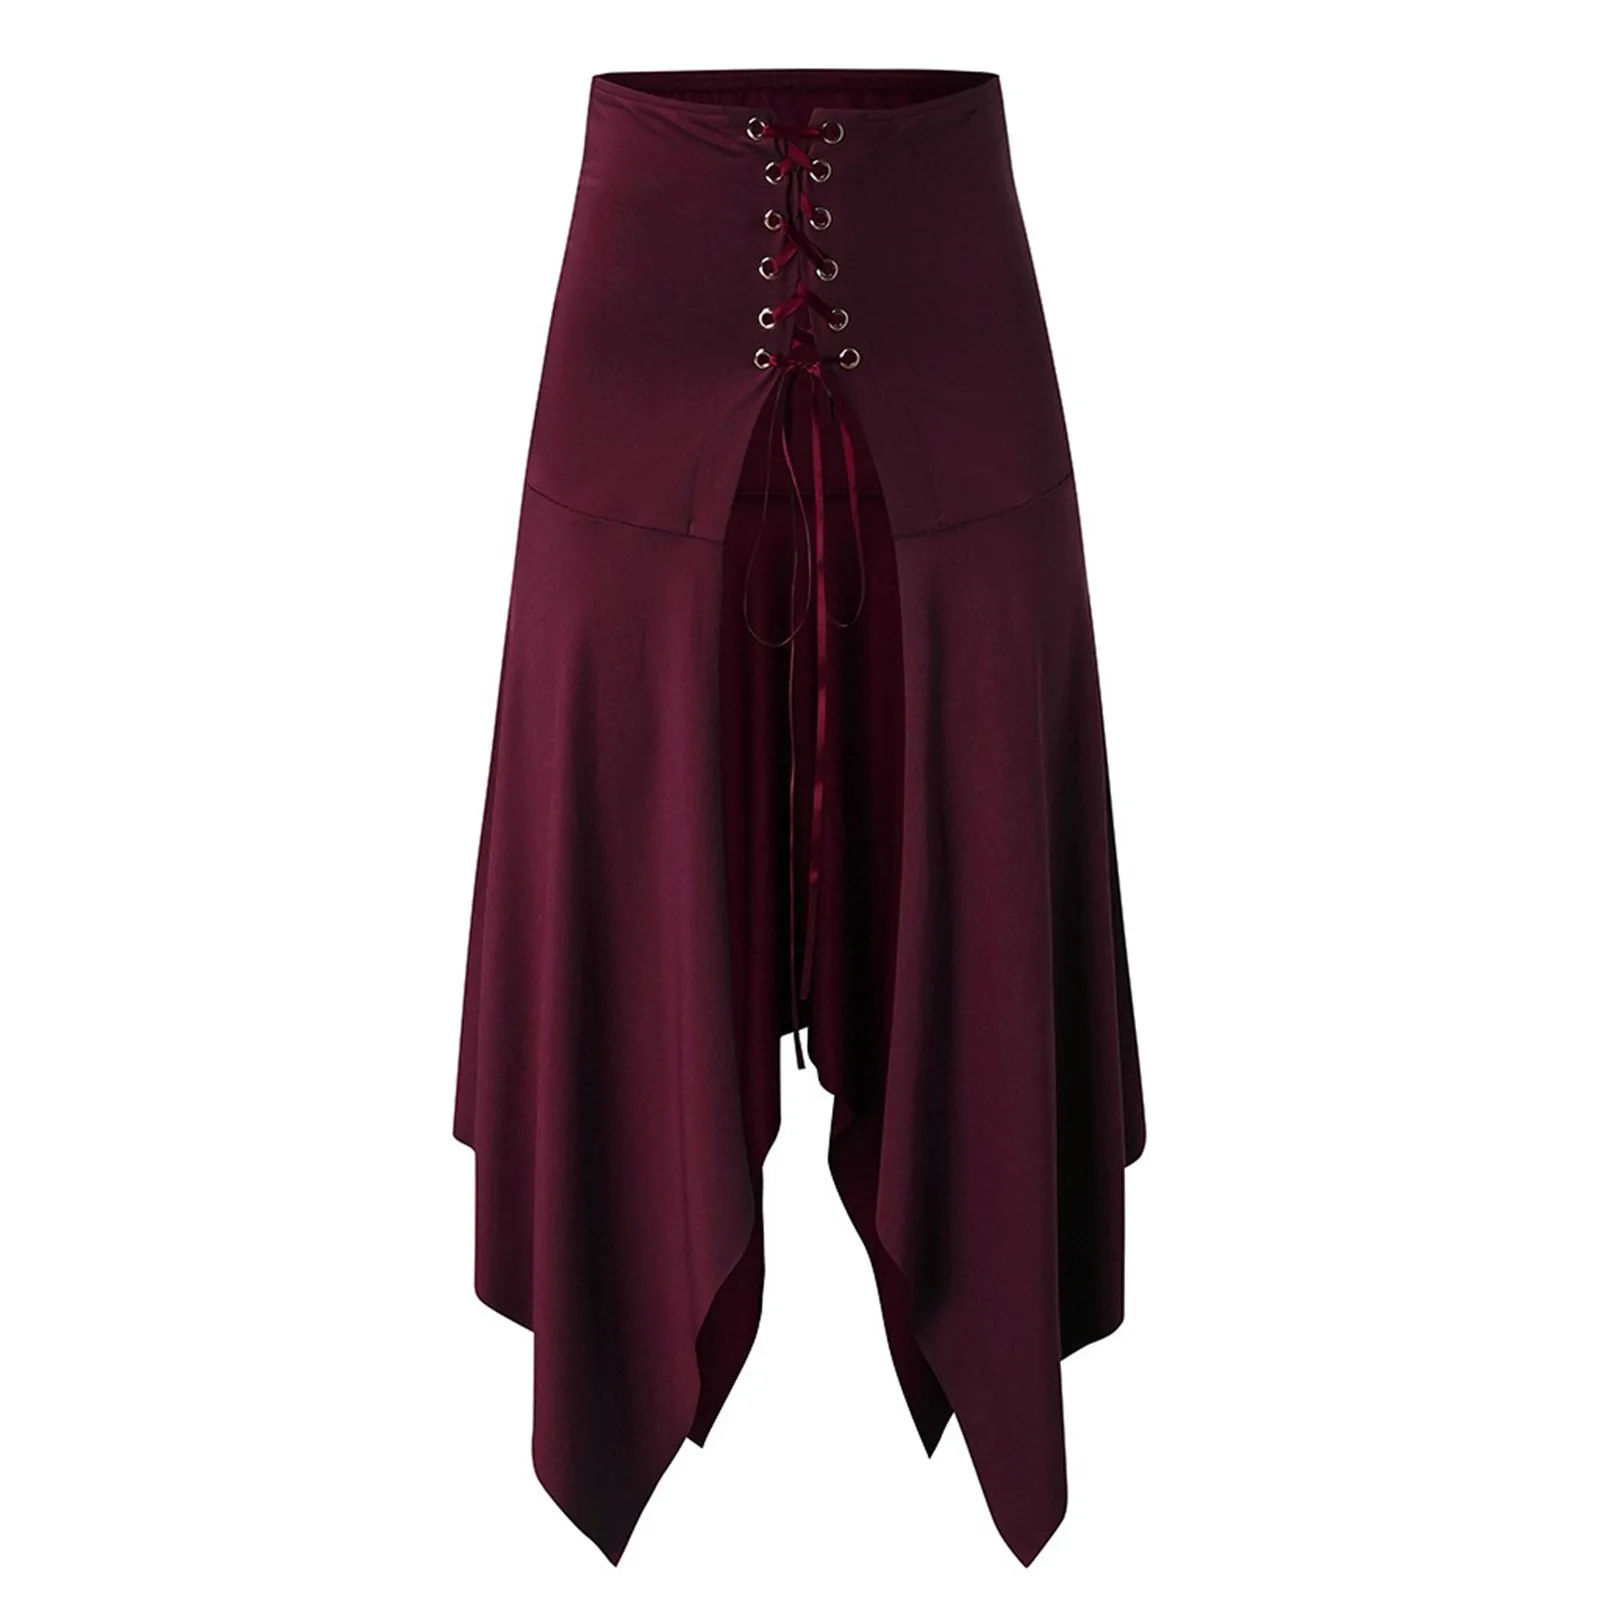 

Women Fashion Solid Gothic Punk Asymmetric Lace Up Slit Front Skirt A Line Skirt Bed Skirt For Adjustable Bed Frame